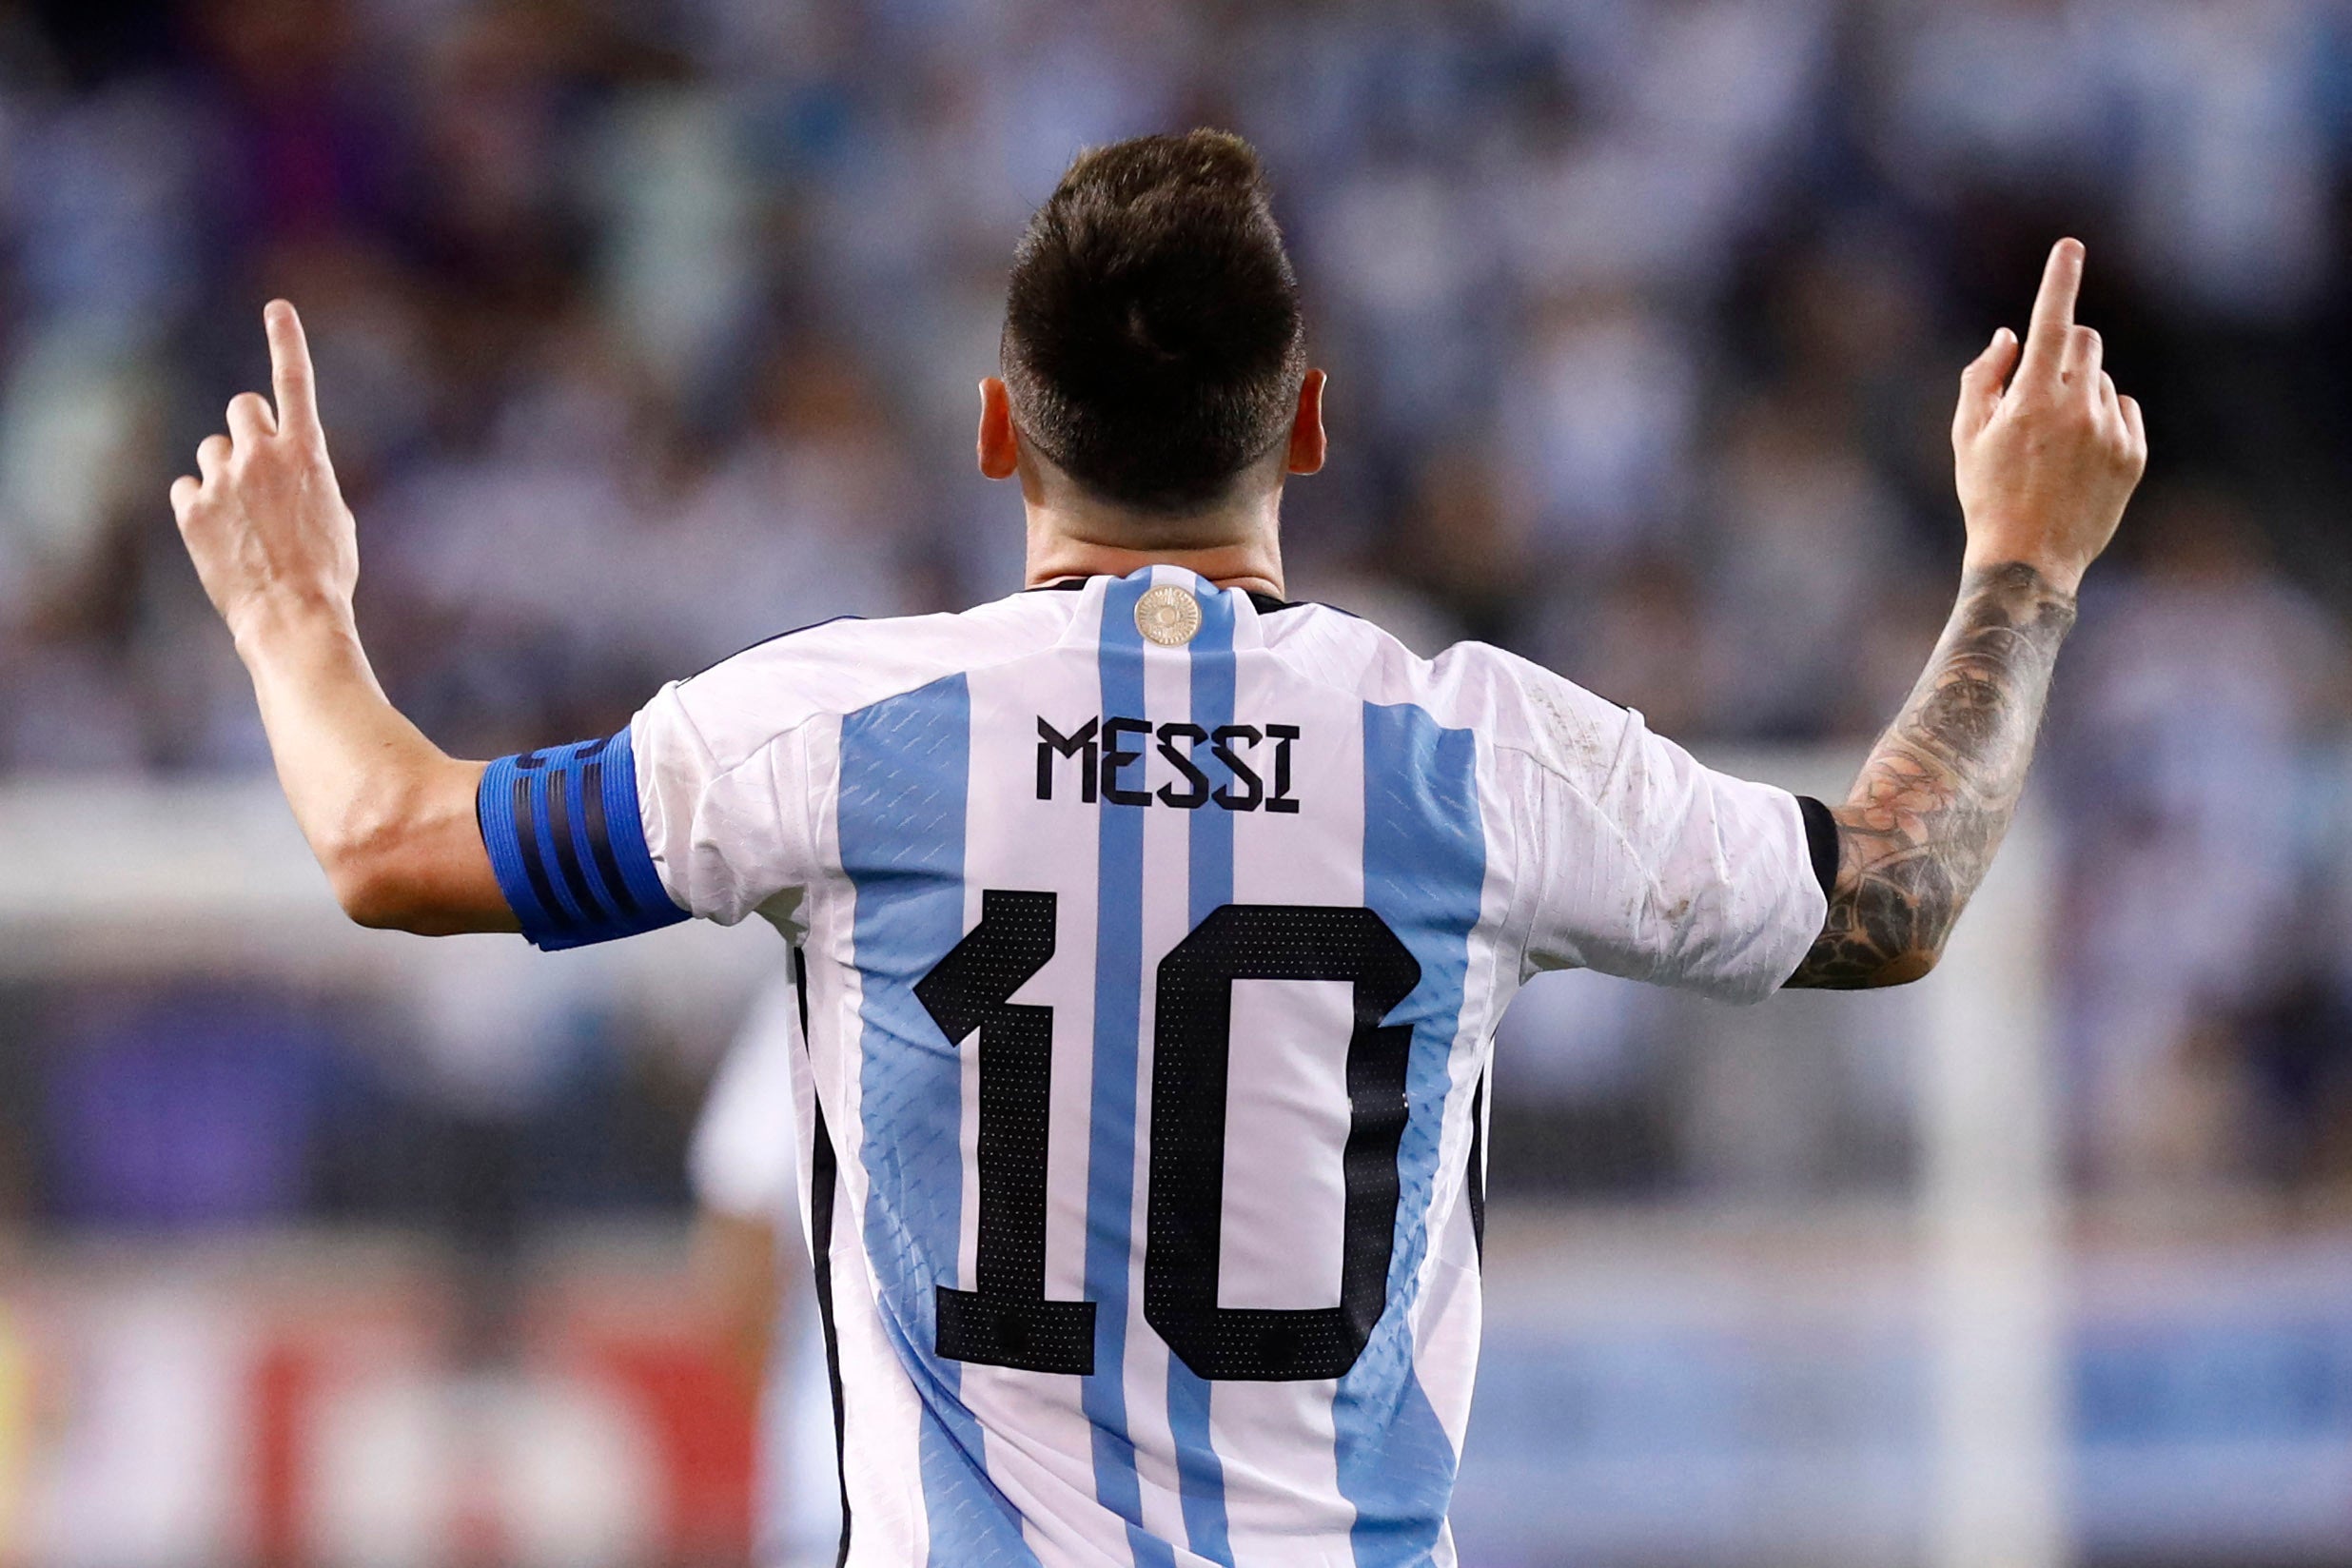 Lionel Messi is seeking to finally lift the World Cup trophy